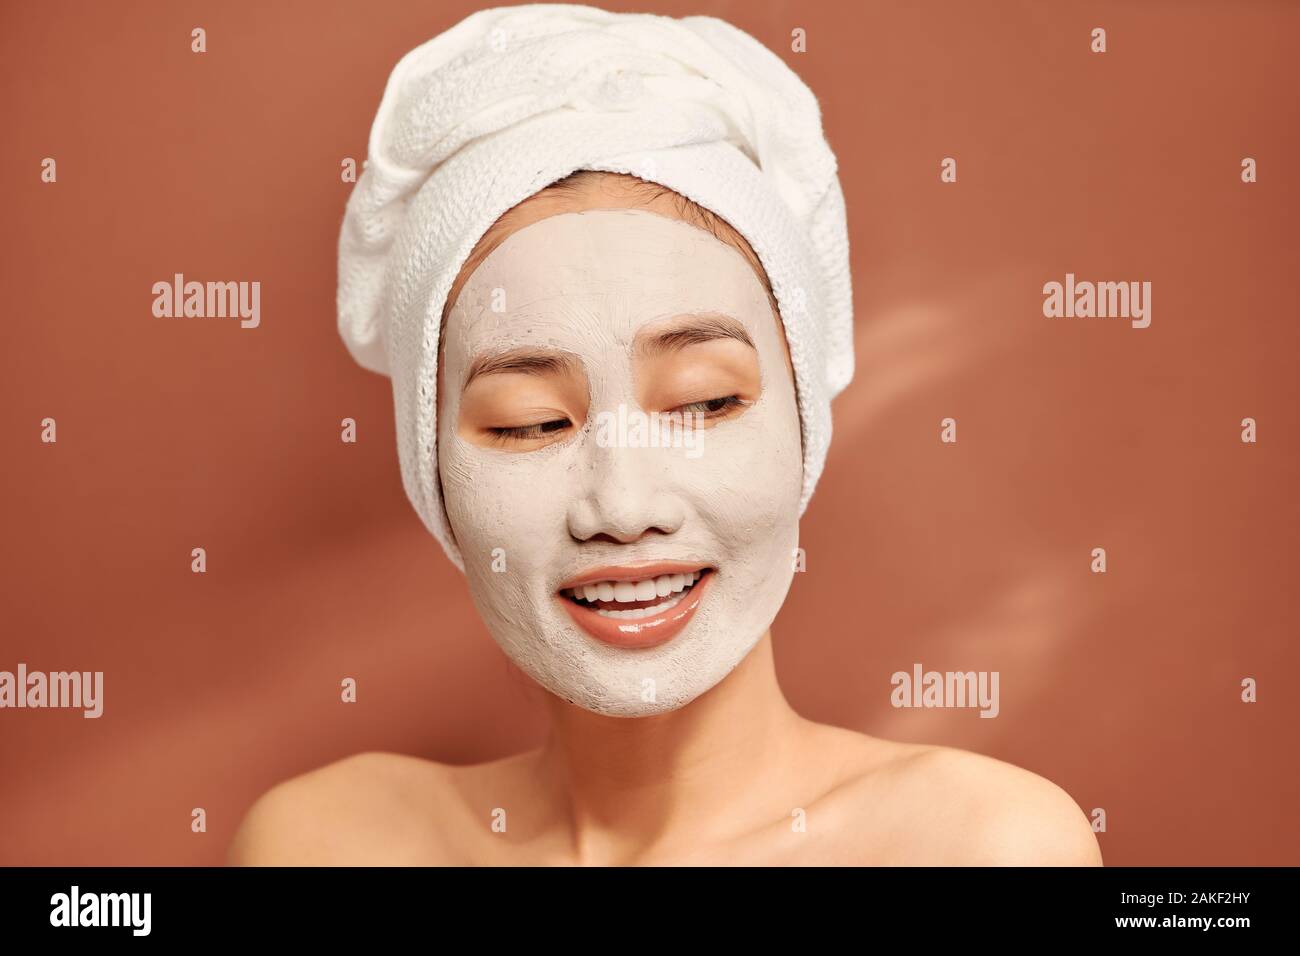 Spa girl with pleased facial expression, applies clay mask on face, gets beauty treatments, wears white soft towel on head Stock Photo